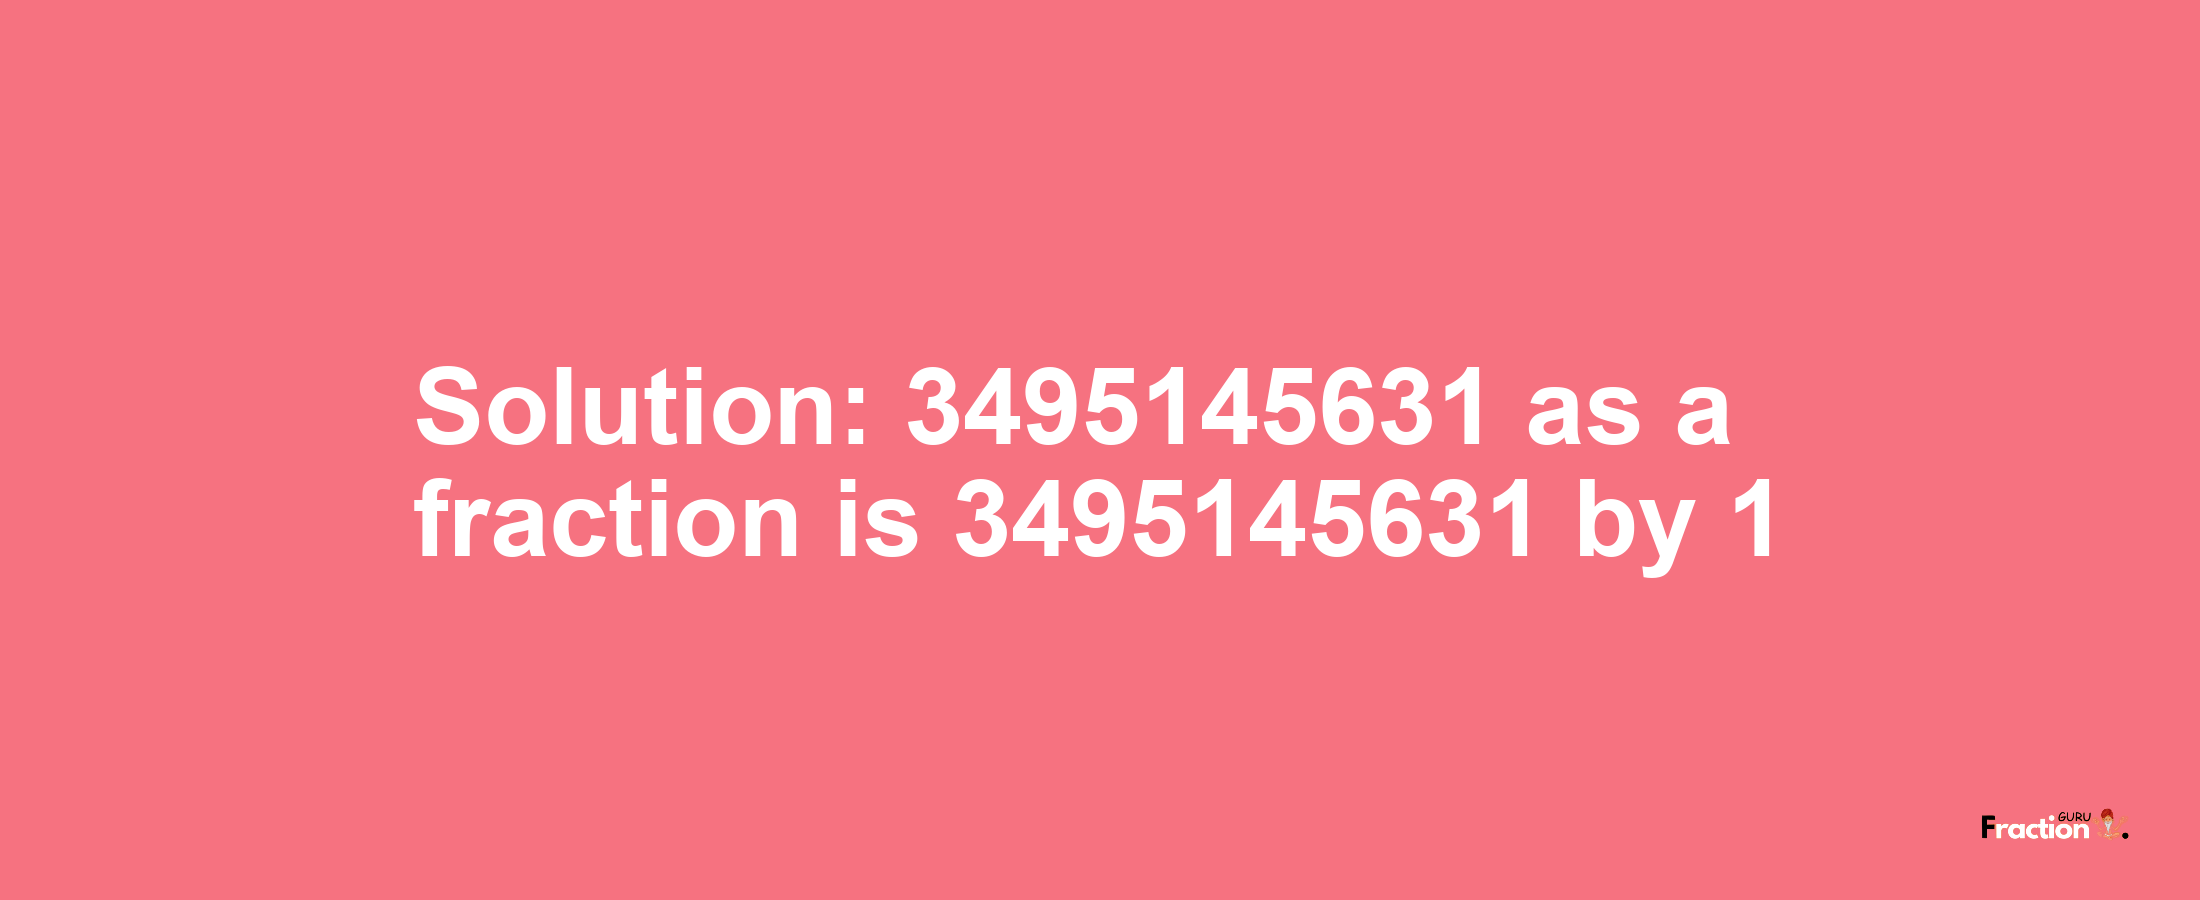 Solution:3495145631 as a fraction is 3495145631/1